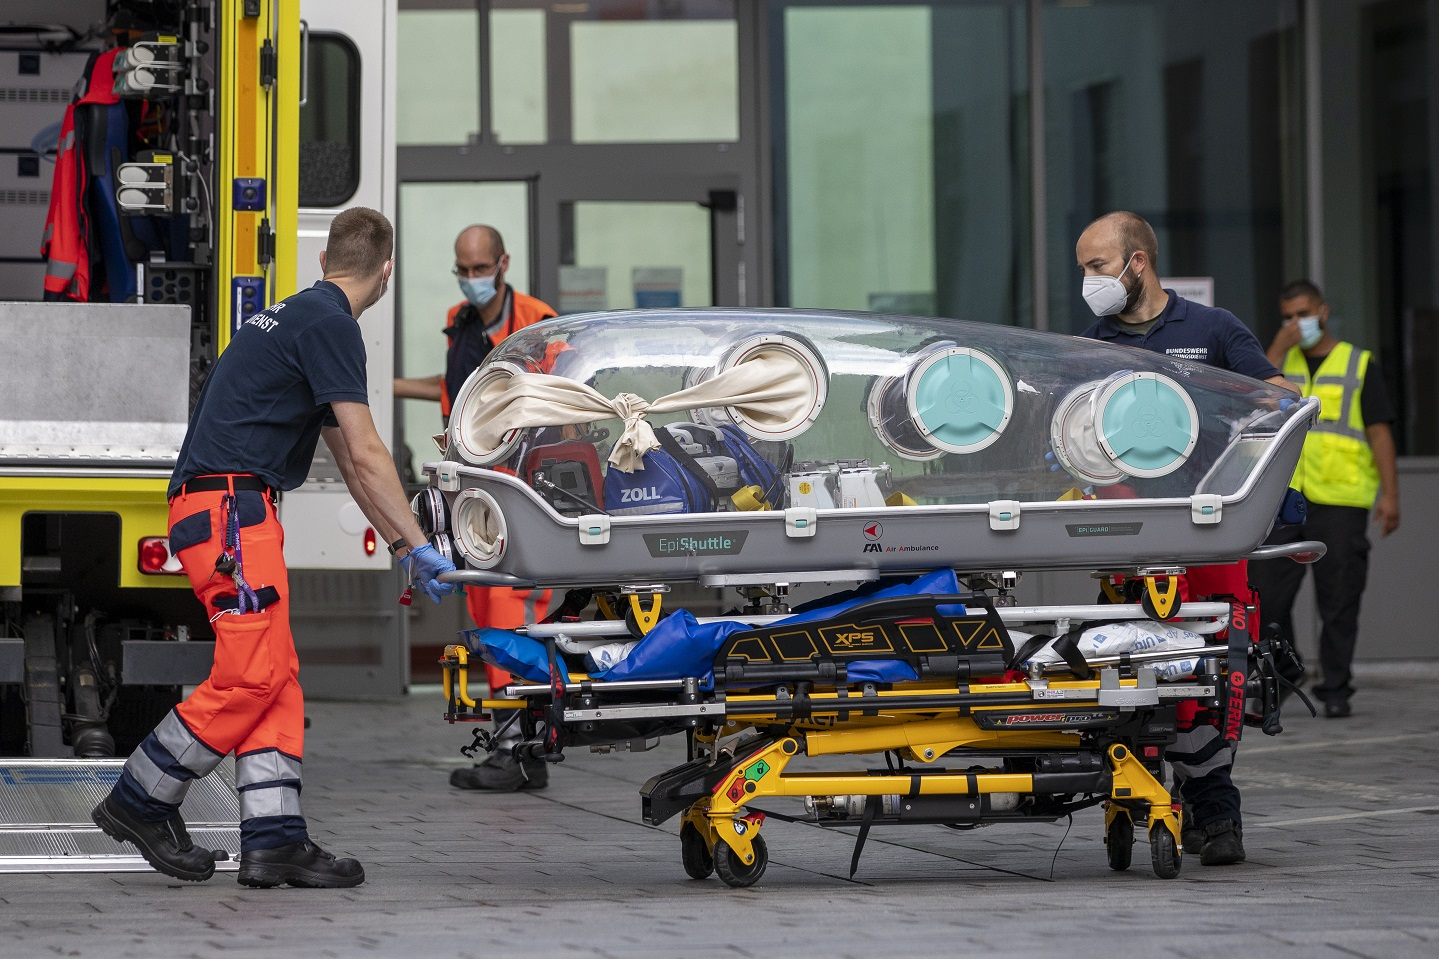 German army emergency personnel load portable isolation unit (Epi Shuttle) into their ambulance that was used to transport Russian opposition figure Alexei Navalny at Charite hospital on August 22, 2020 in Berlin, Germany.